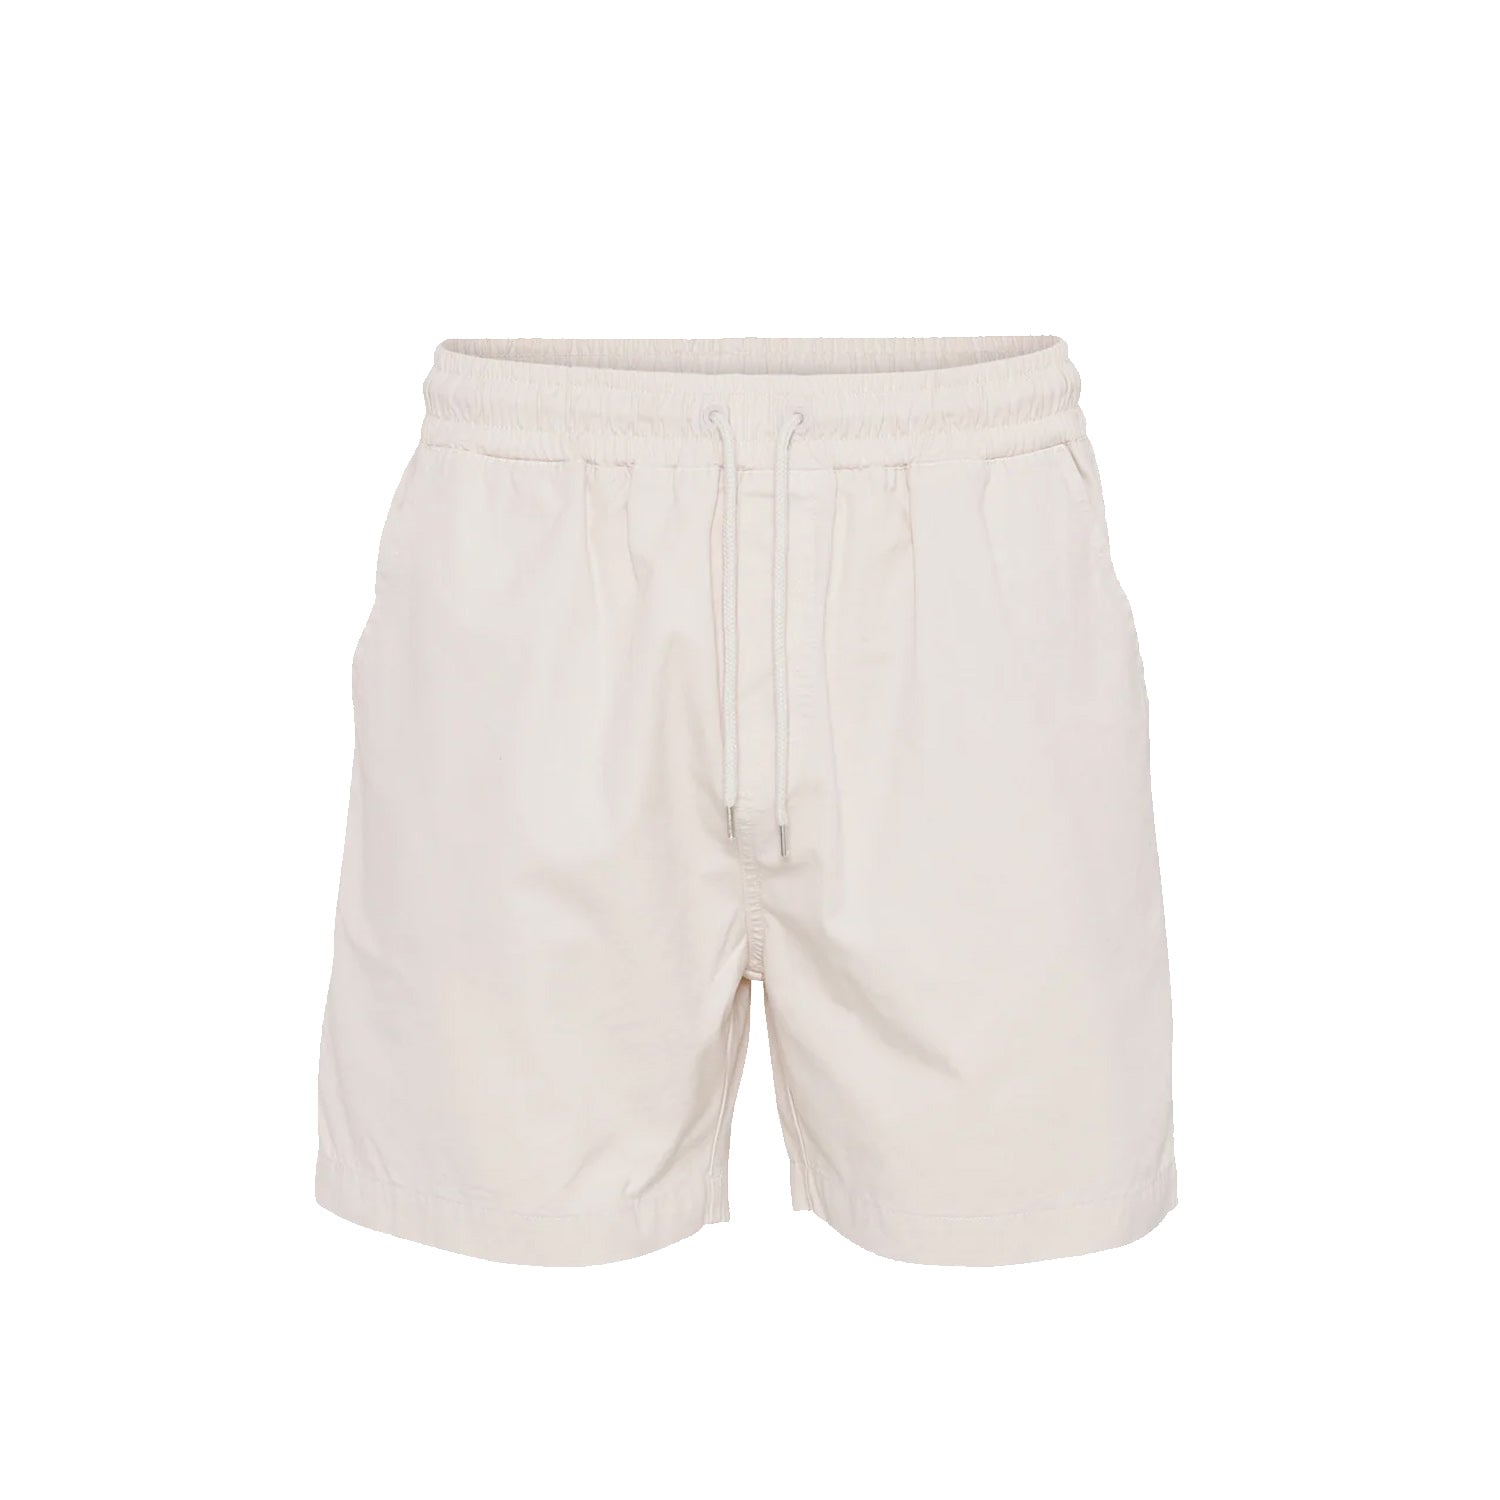 Organic Twill Shorts IVORY WHITE
Who doesn’t love a short-short? Show off those legs in the organic twill shorts. They’re high-quality and durable, offering you a colorfully cool look for warmer days (though you’re welcome to wear them on the colder days too!).• Unisex Style• 100% Organic Cotton• Environmentally Friendly Dye• PETA Approved Vegan• Pre-washed• Garment Dyed• Anti-pilling• 200g. Fabric• Made in Portugal COLORFUL STANDARD